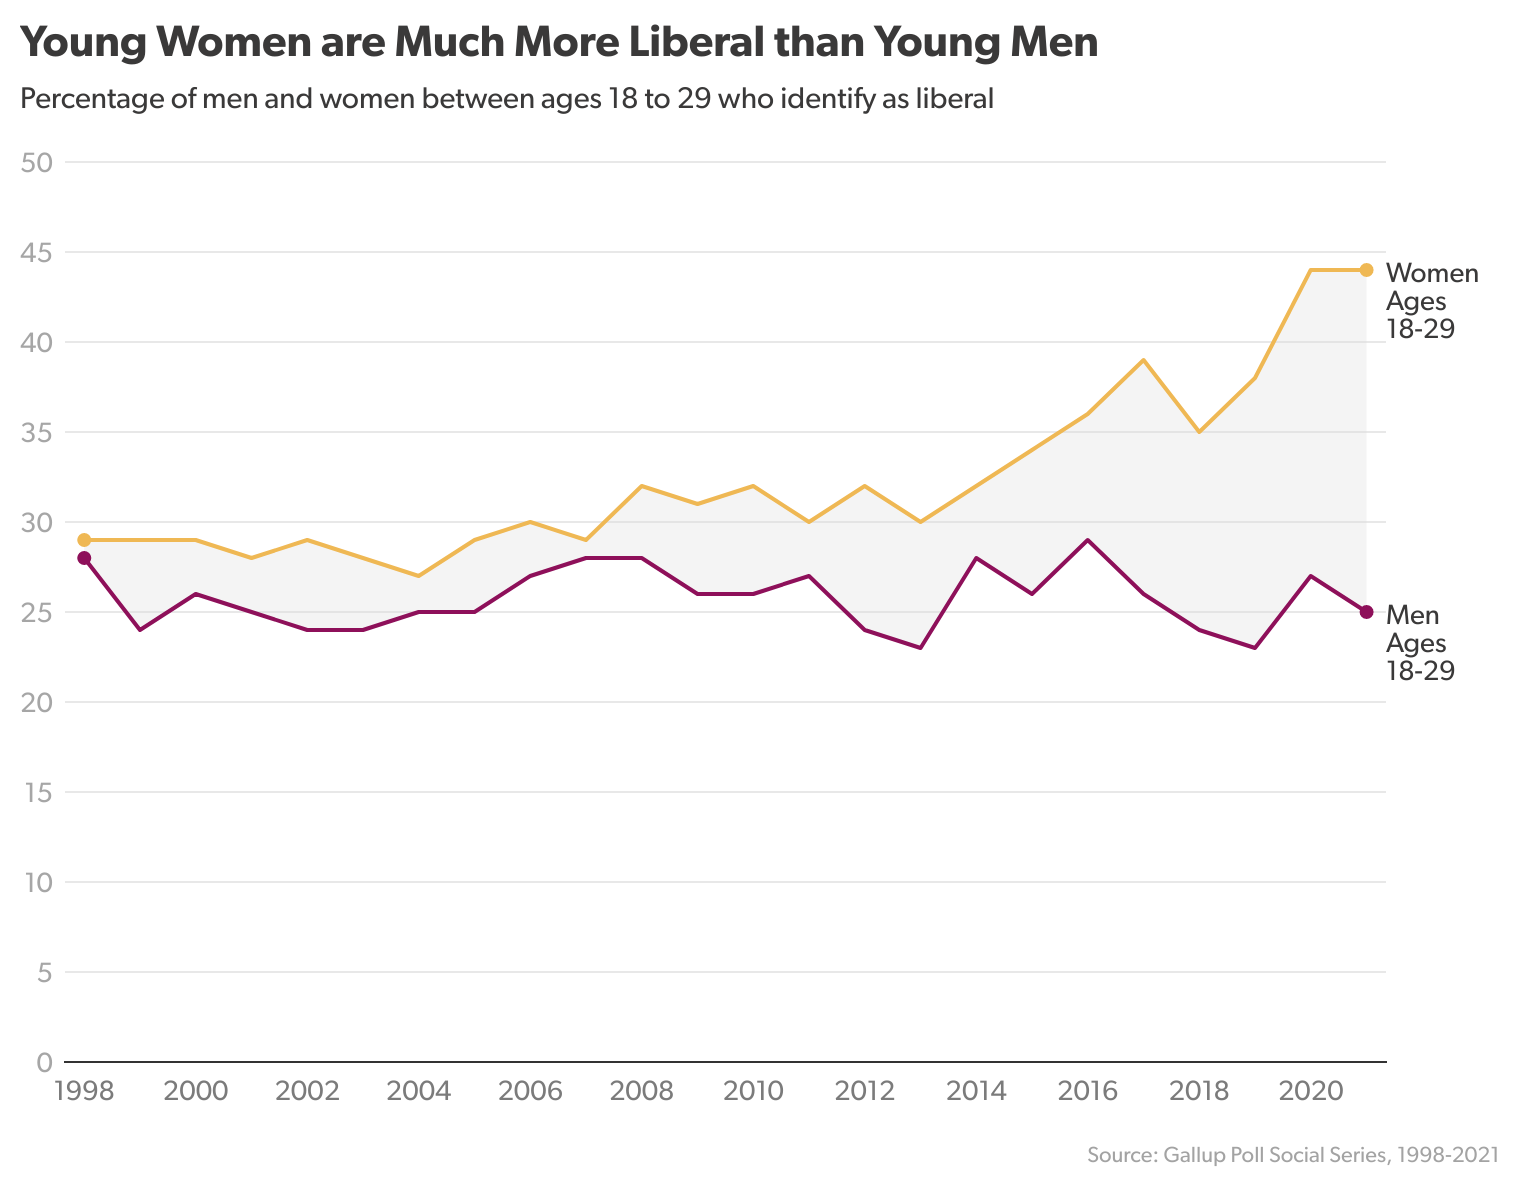 SV15g-young-women-are-much-more-liberal-than-young-men.png